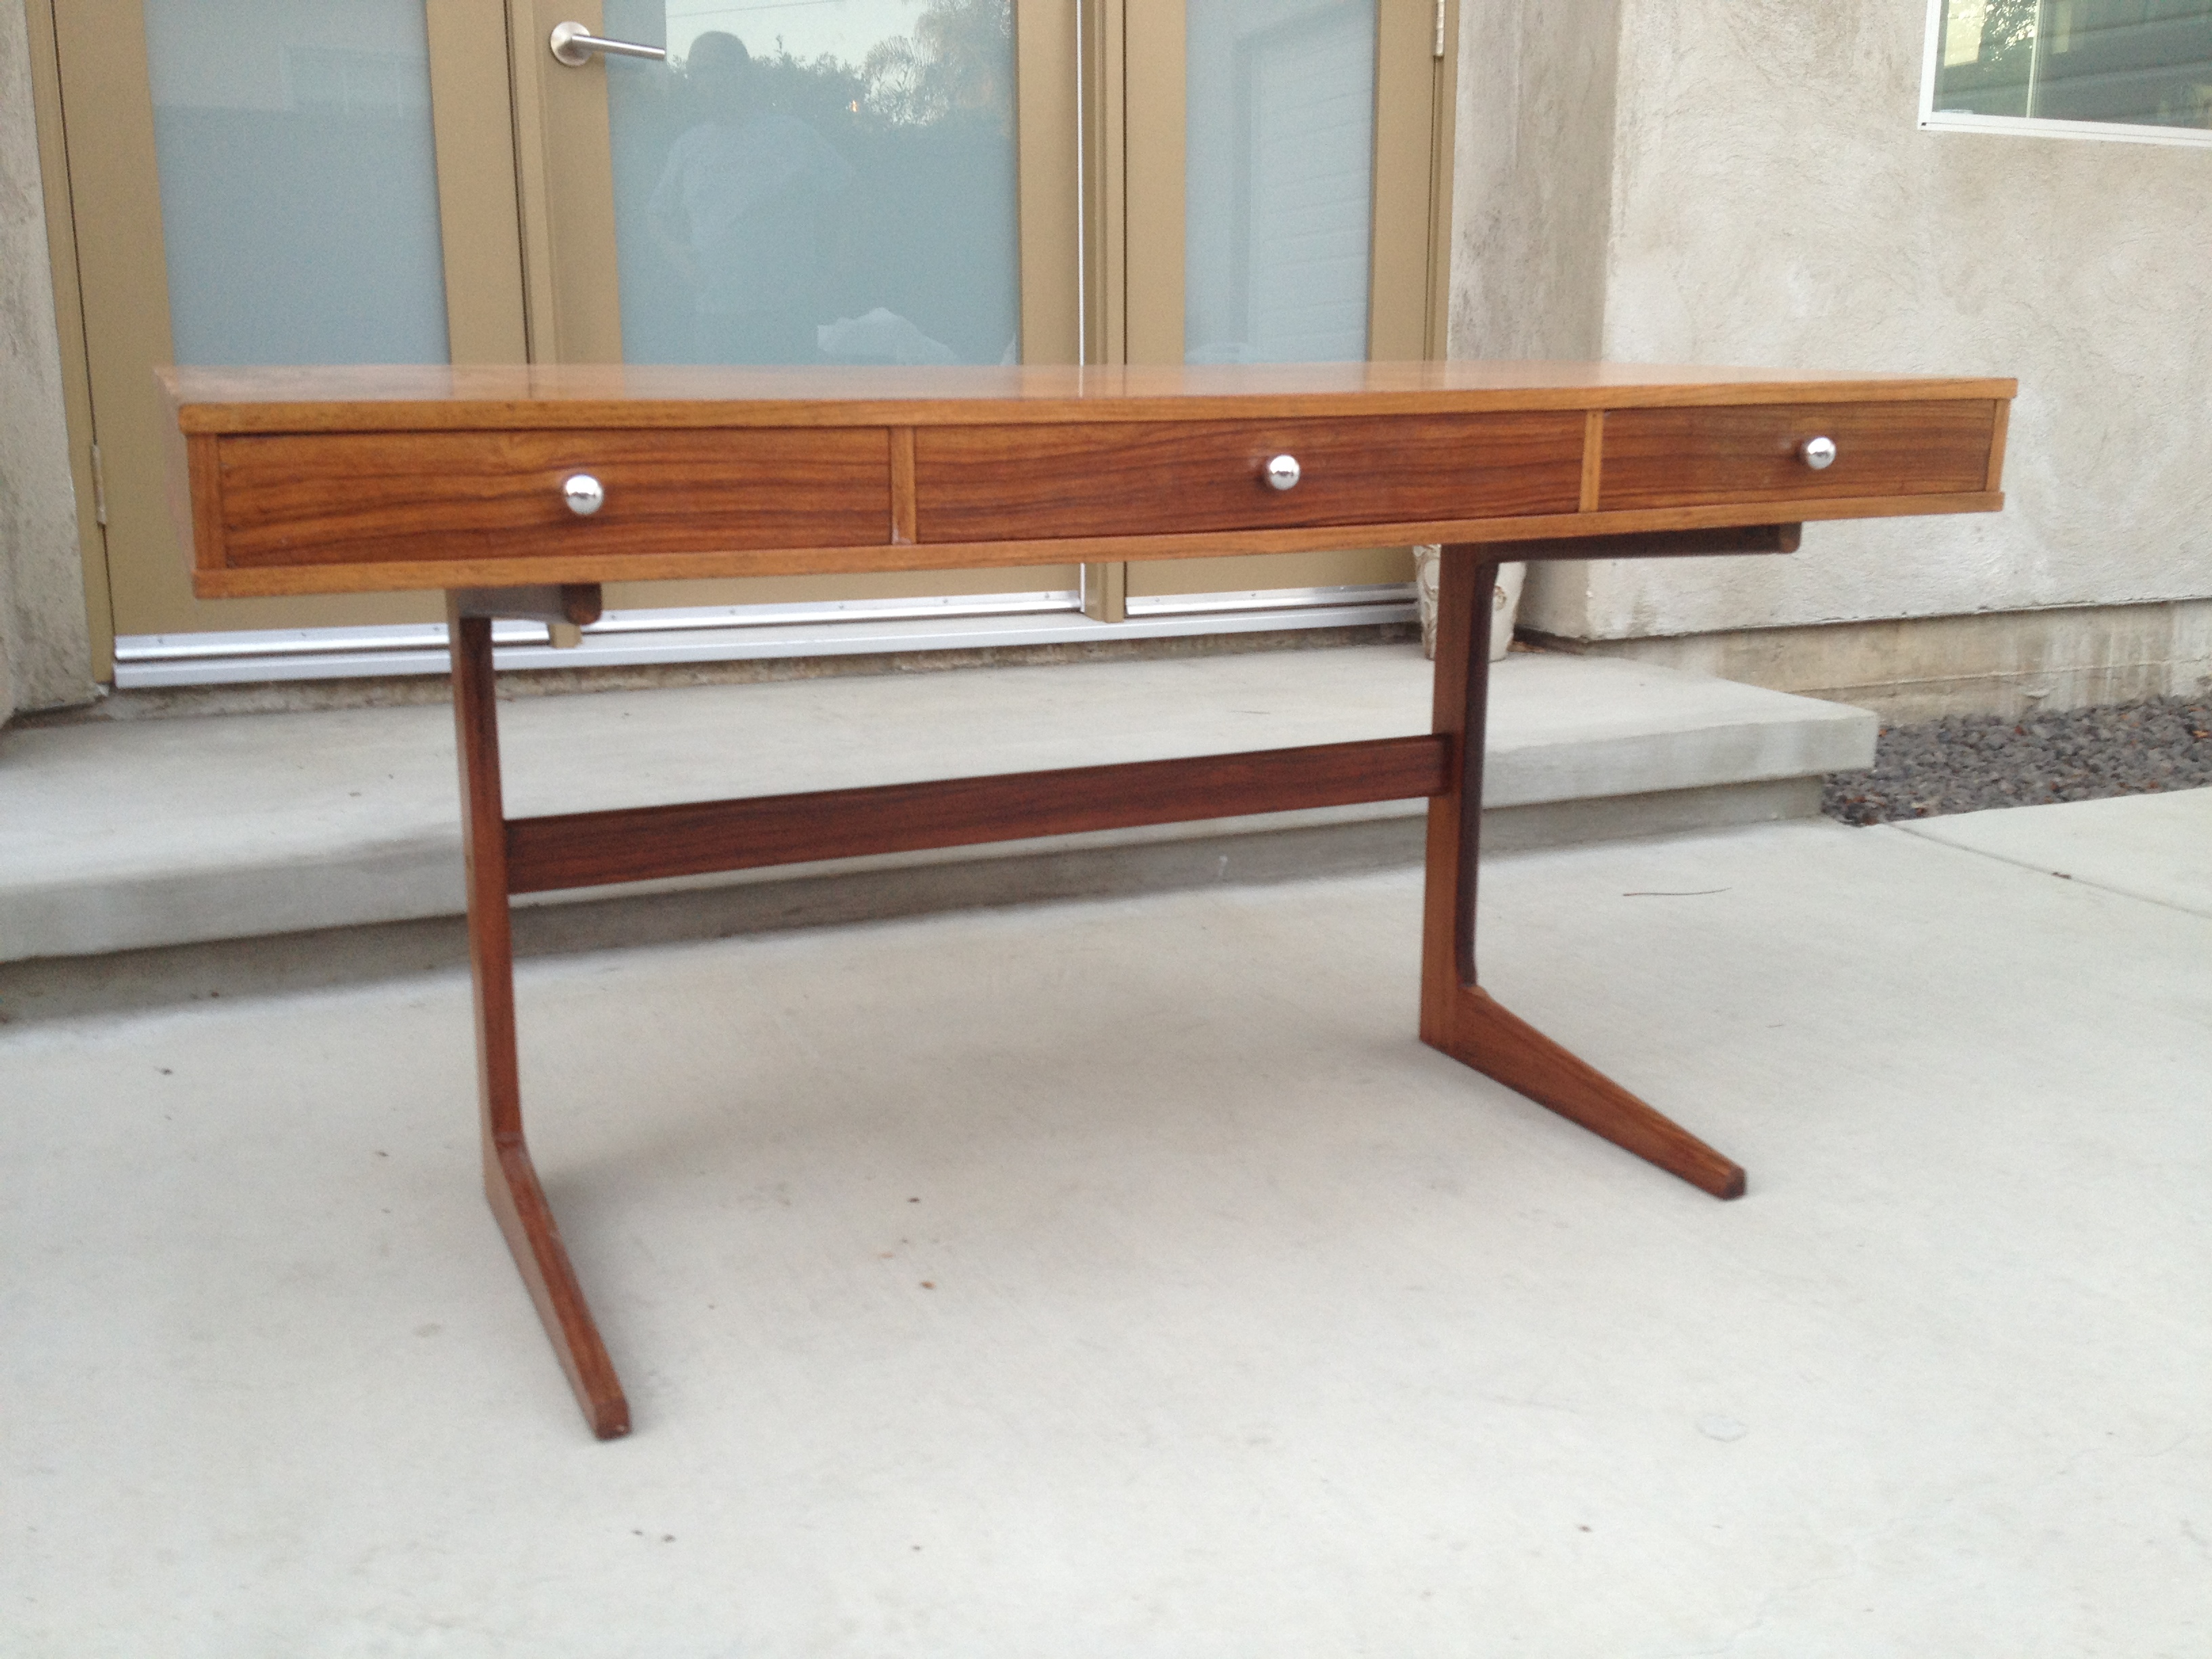 Request Mid Century Modern Desk Like This One Minus The Legs